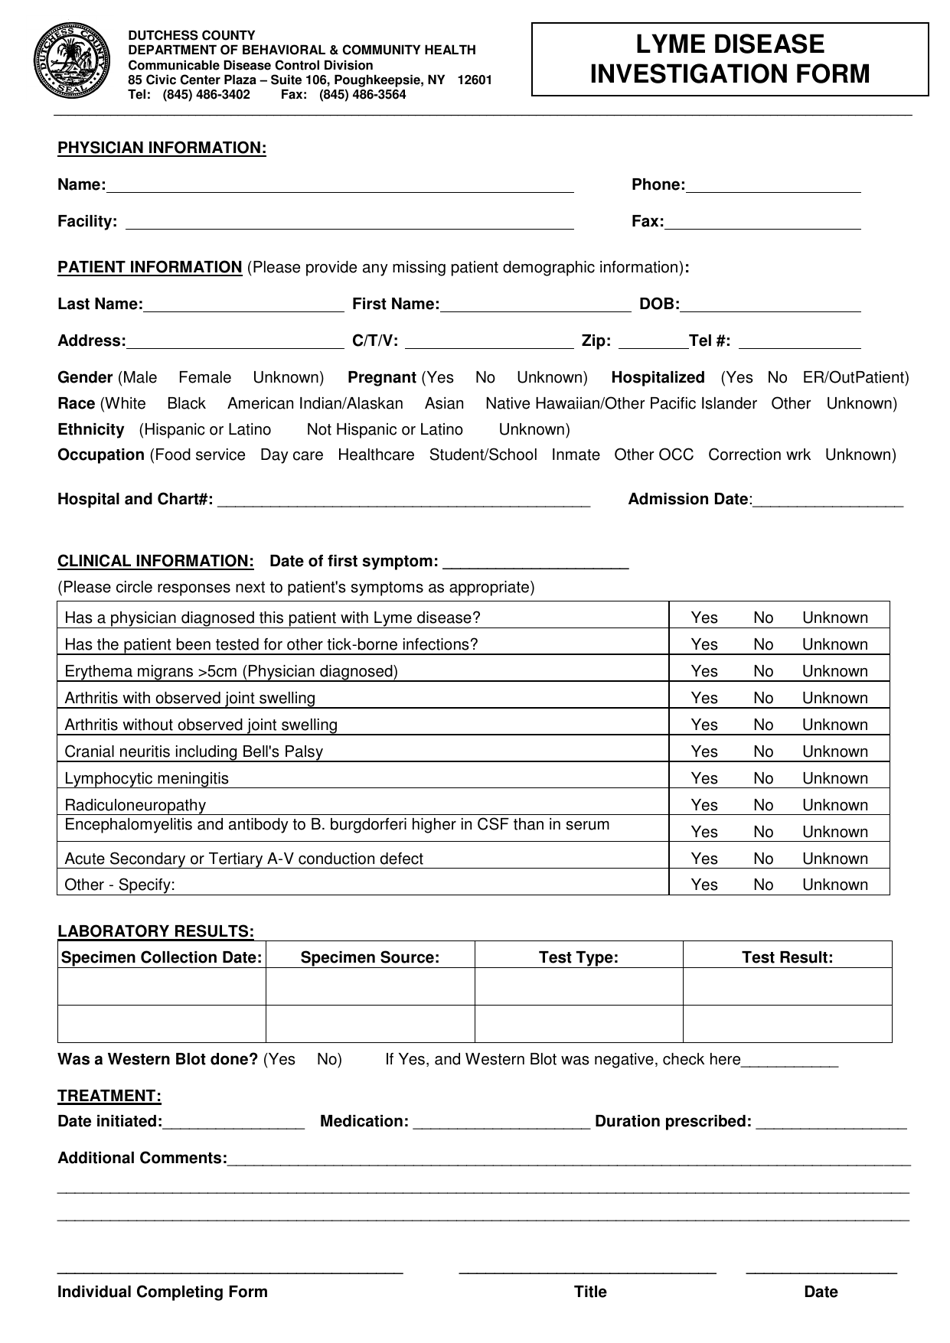 Lyme Disease Investigation Form - Dutchess County, New York, Page 1